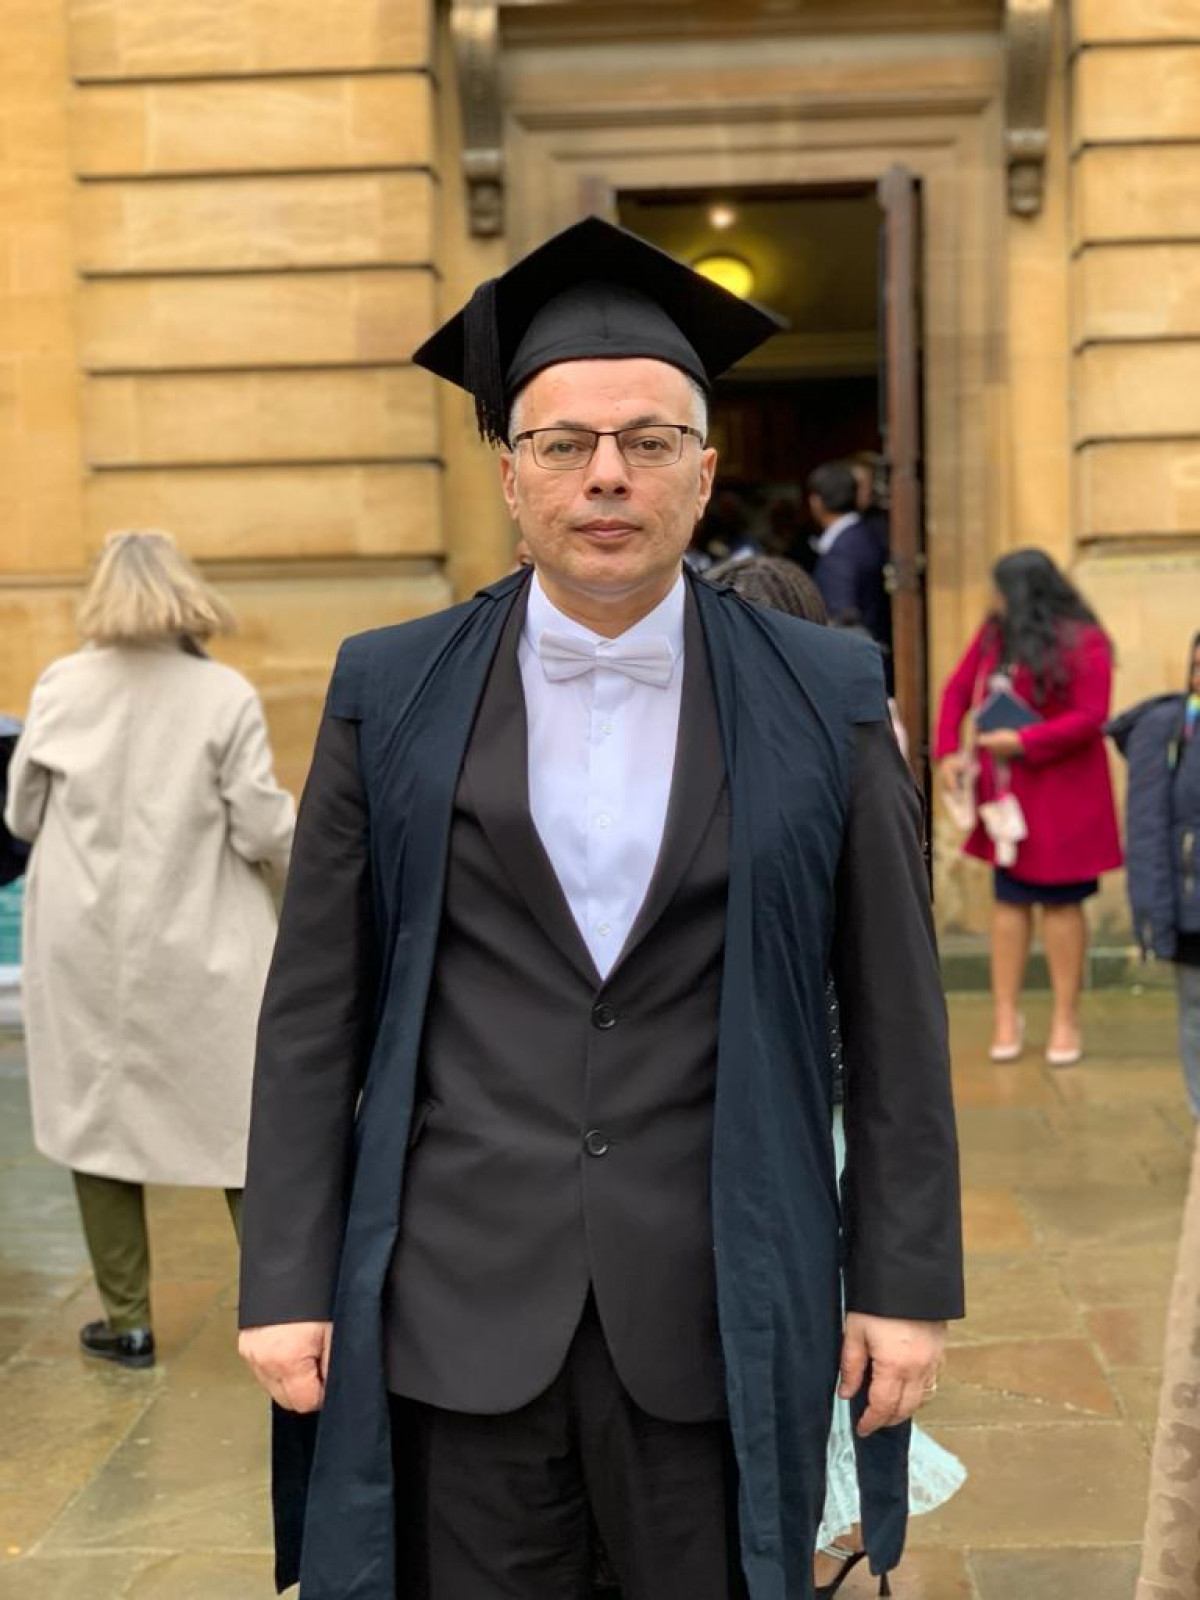 Vusal Gasimli has been awarded a diploma from Oxford University